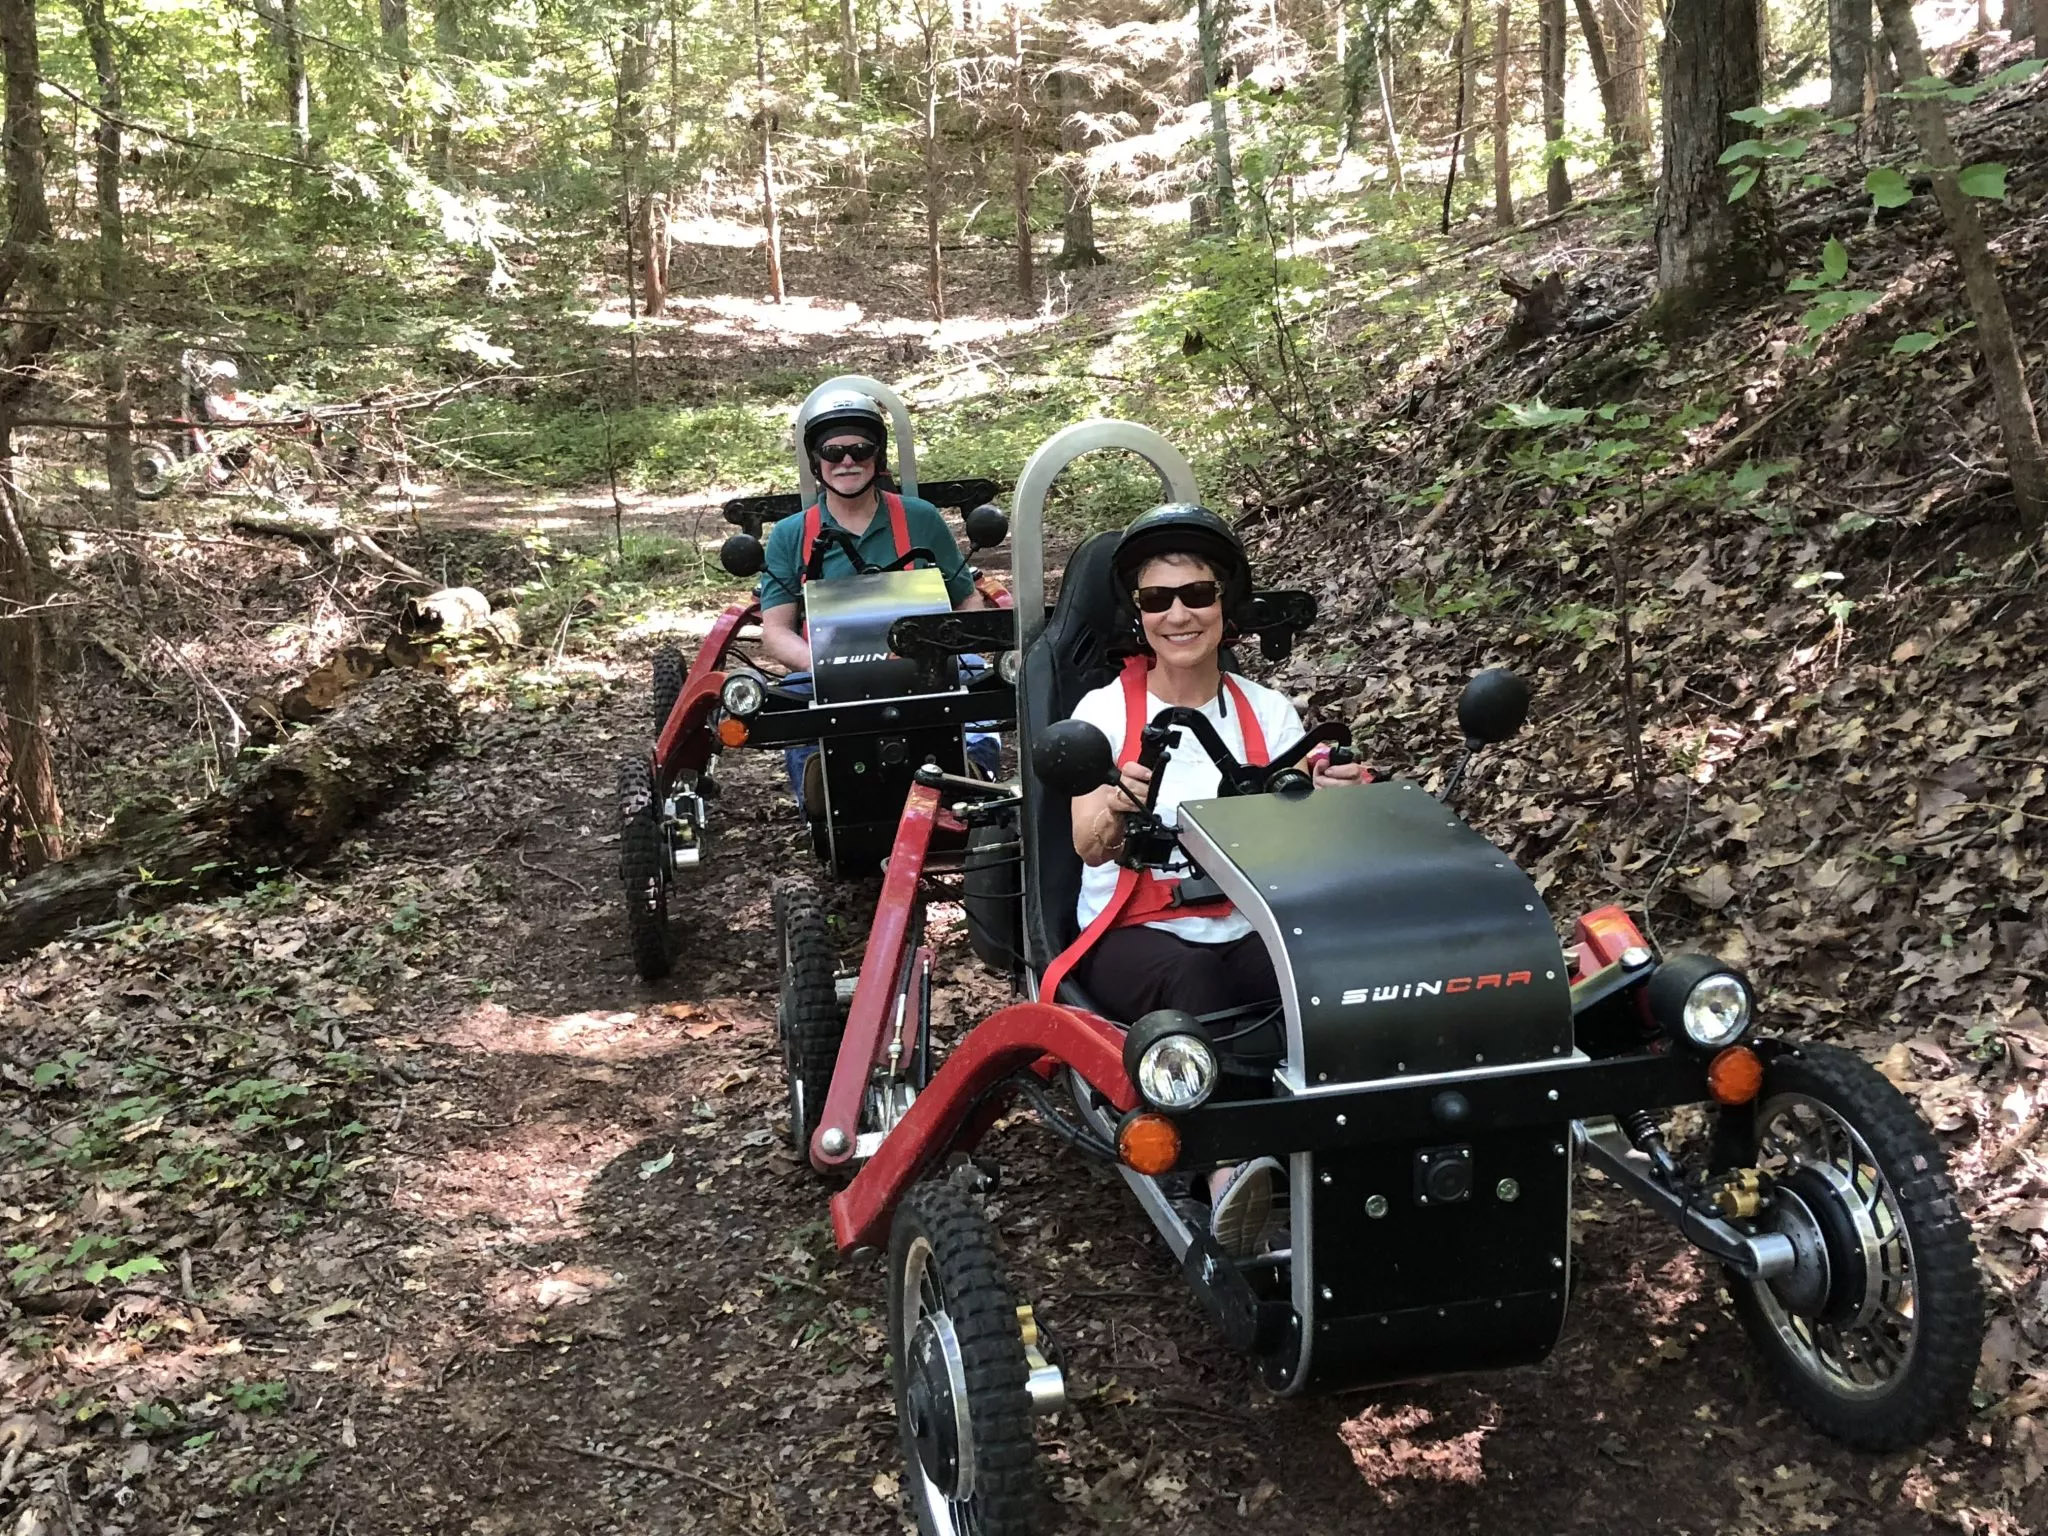 Adventure Sports Innovation Swincar Tour at Reflection riding Nature Center and Arboretum on Lookout Mountain in Chattanooga TN.